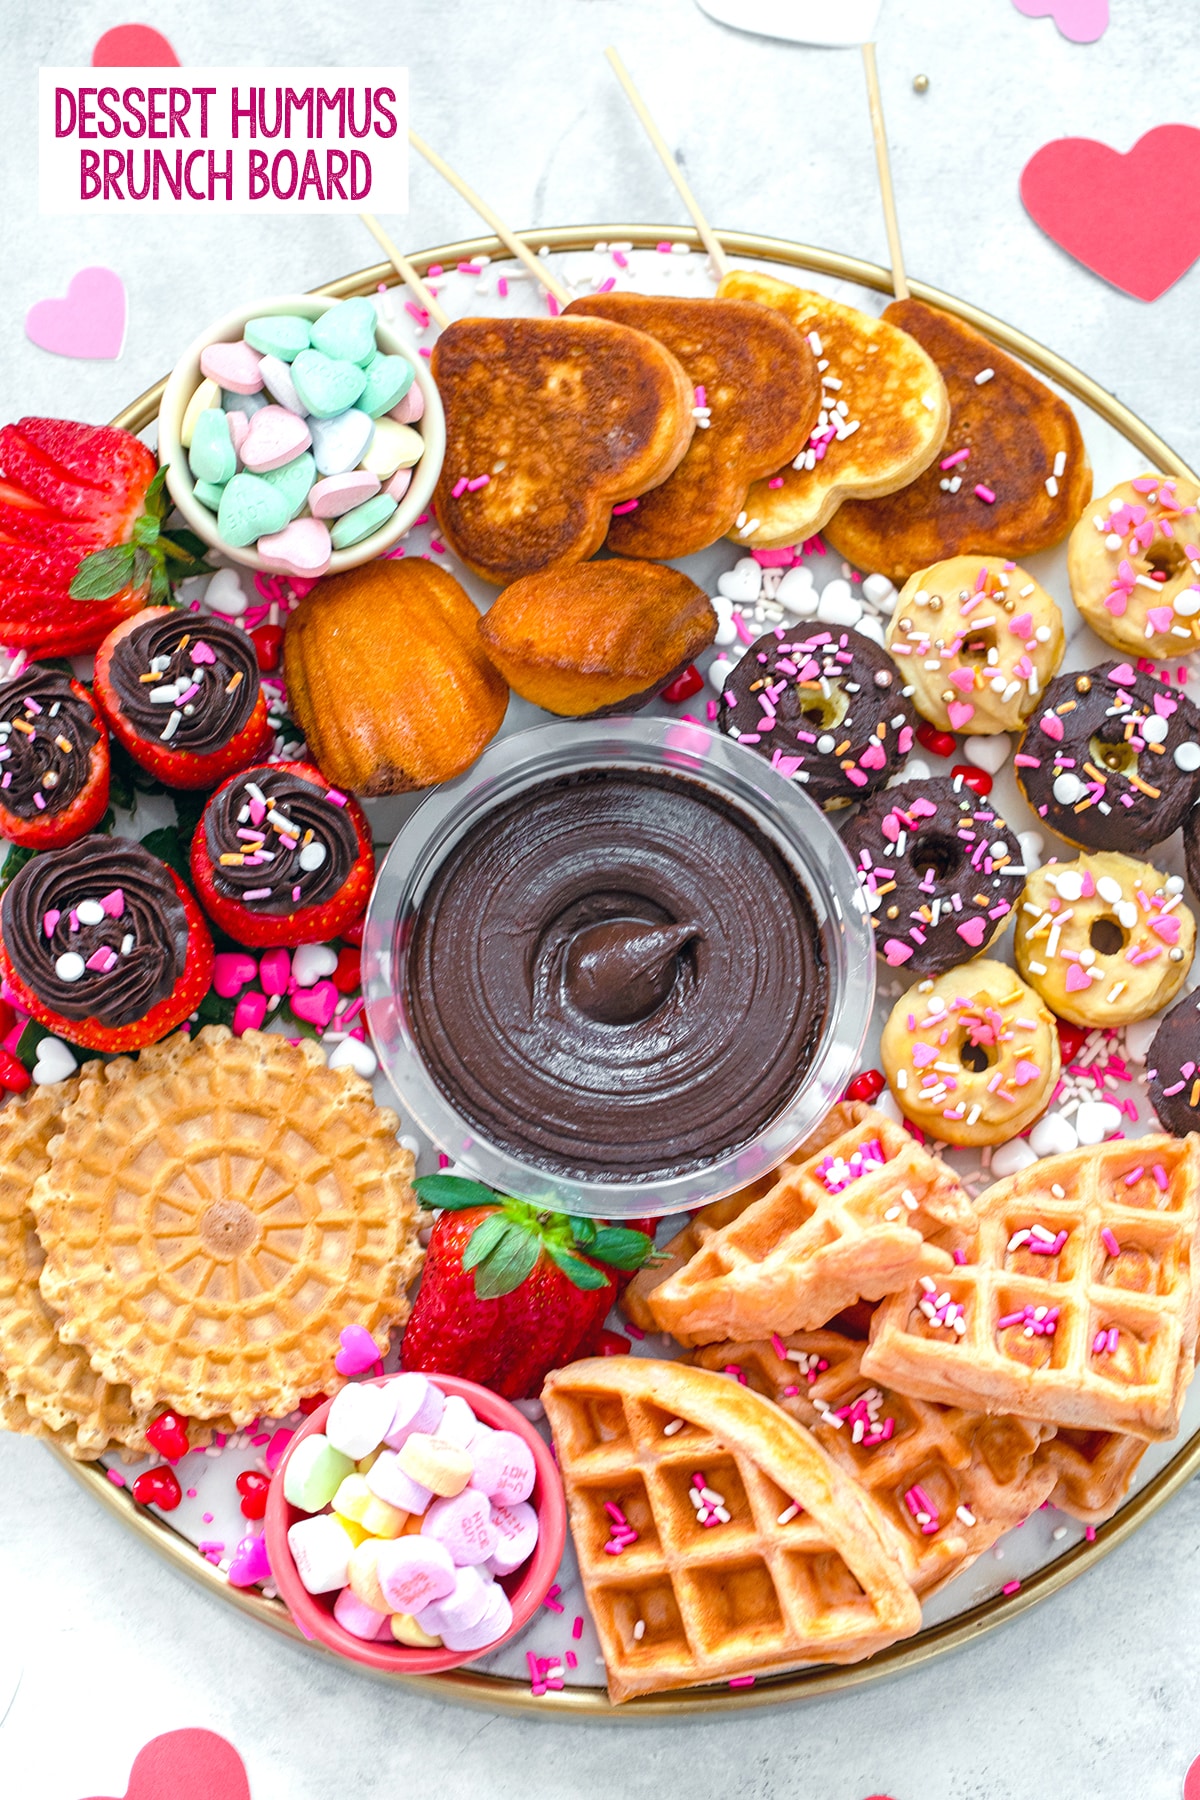 Overhead view of a dessert hummus brunch board featuring dark chocolate hummus surrounded by mini donuts and waffles, heart-shaped pancakes, hummus filled strawberries, pizzells, madeleines, and Valentine's Day candy with "dessert hummus brunch board" text at top.